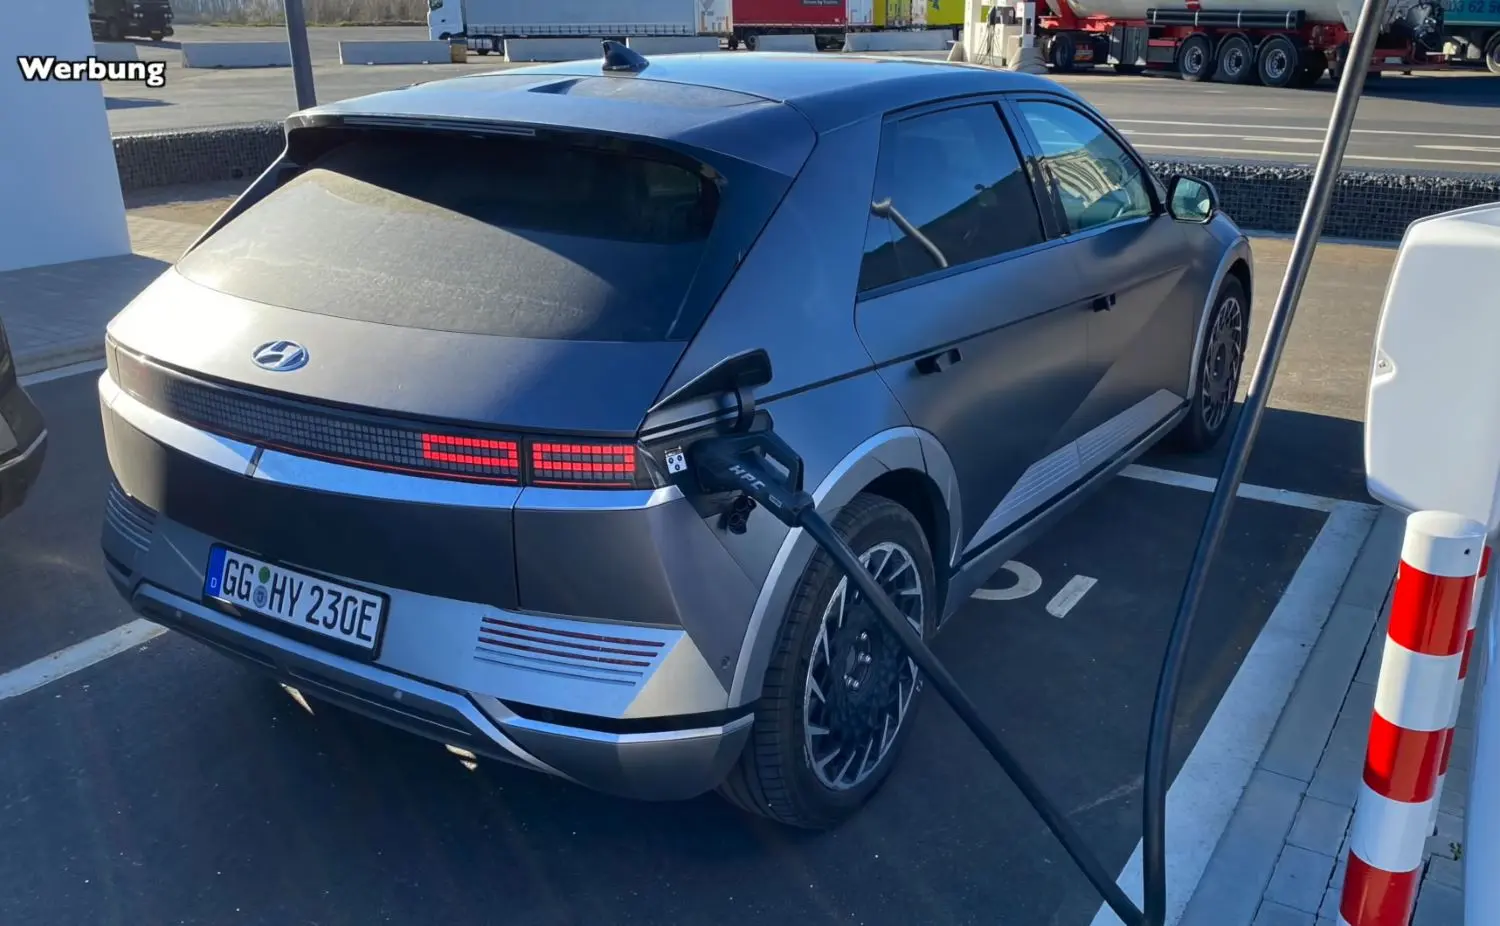 2280% In 16 minutes Hyundai Ioniq 5 Can Charge At 149 kW At 80%